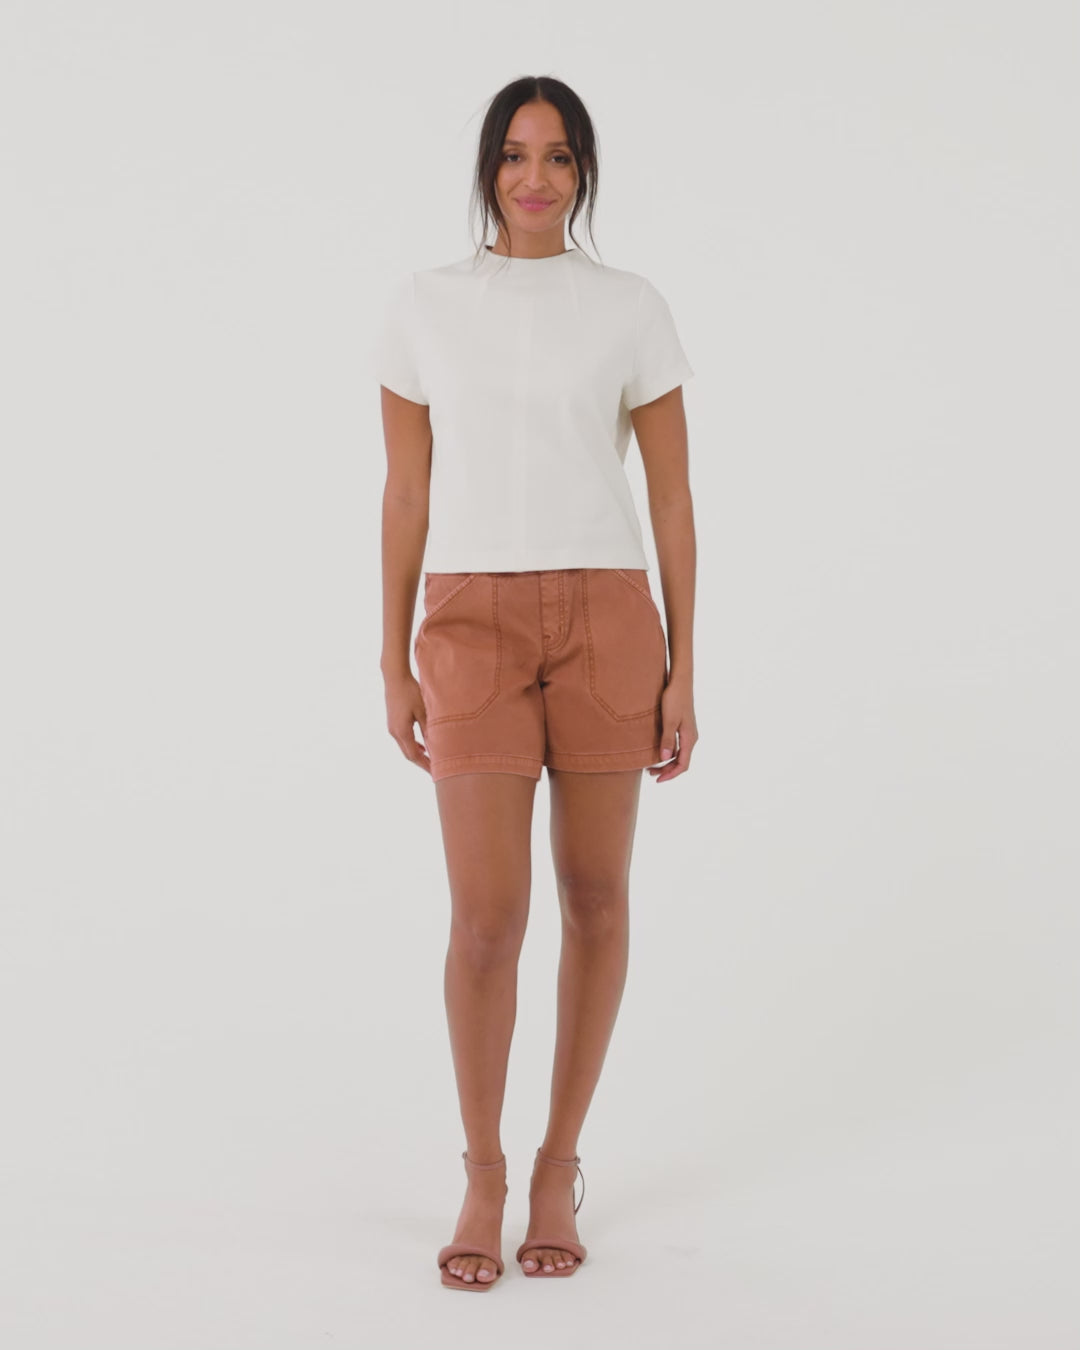 Reiss Spanx Shapewear High-Waisted Mid-Thigh Shorts - REISS Rest